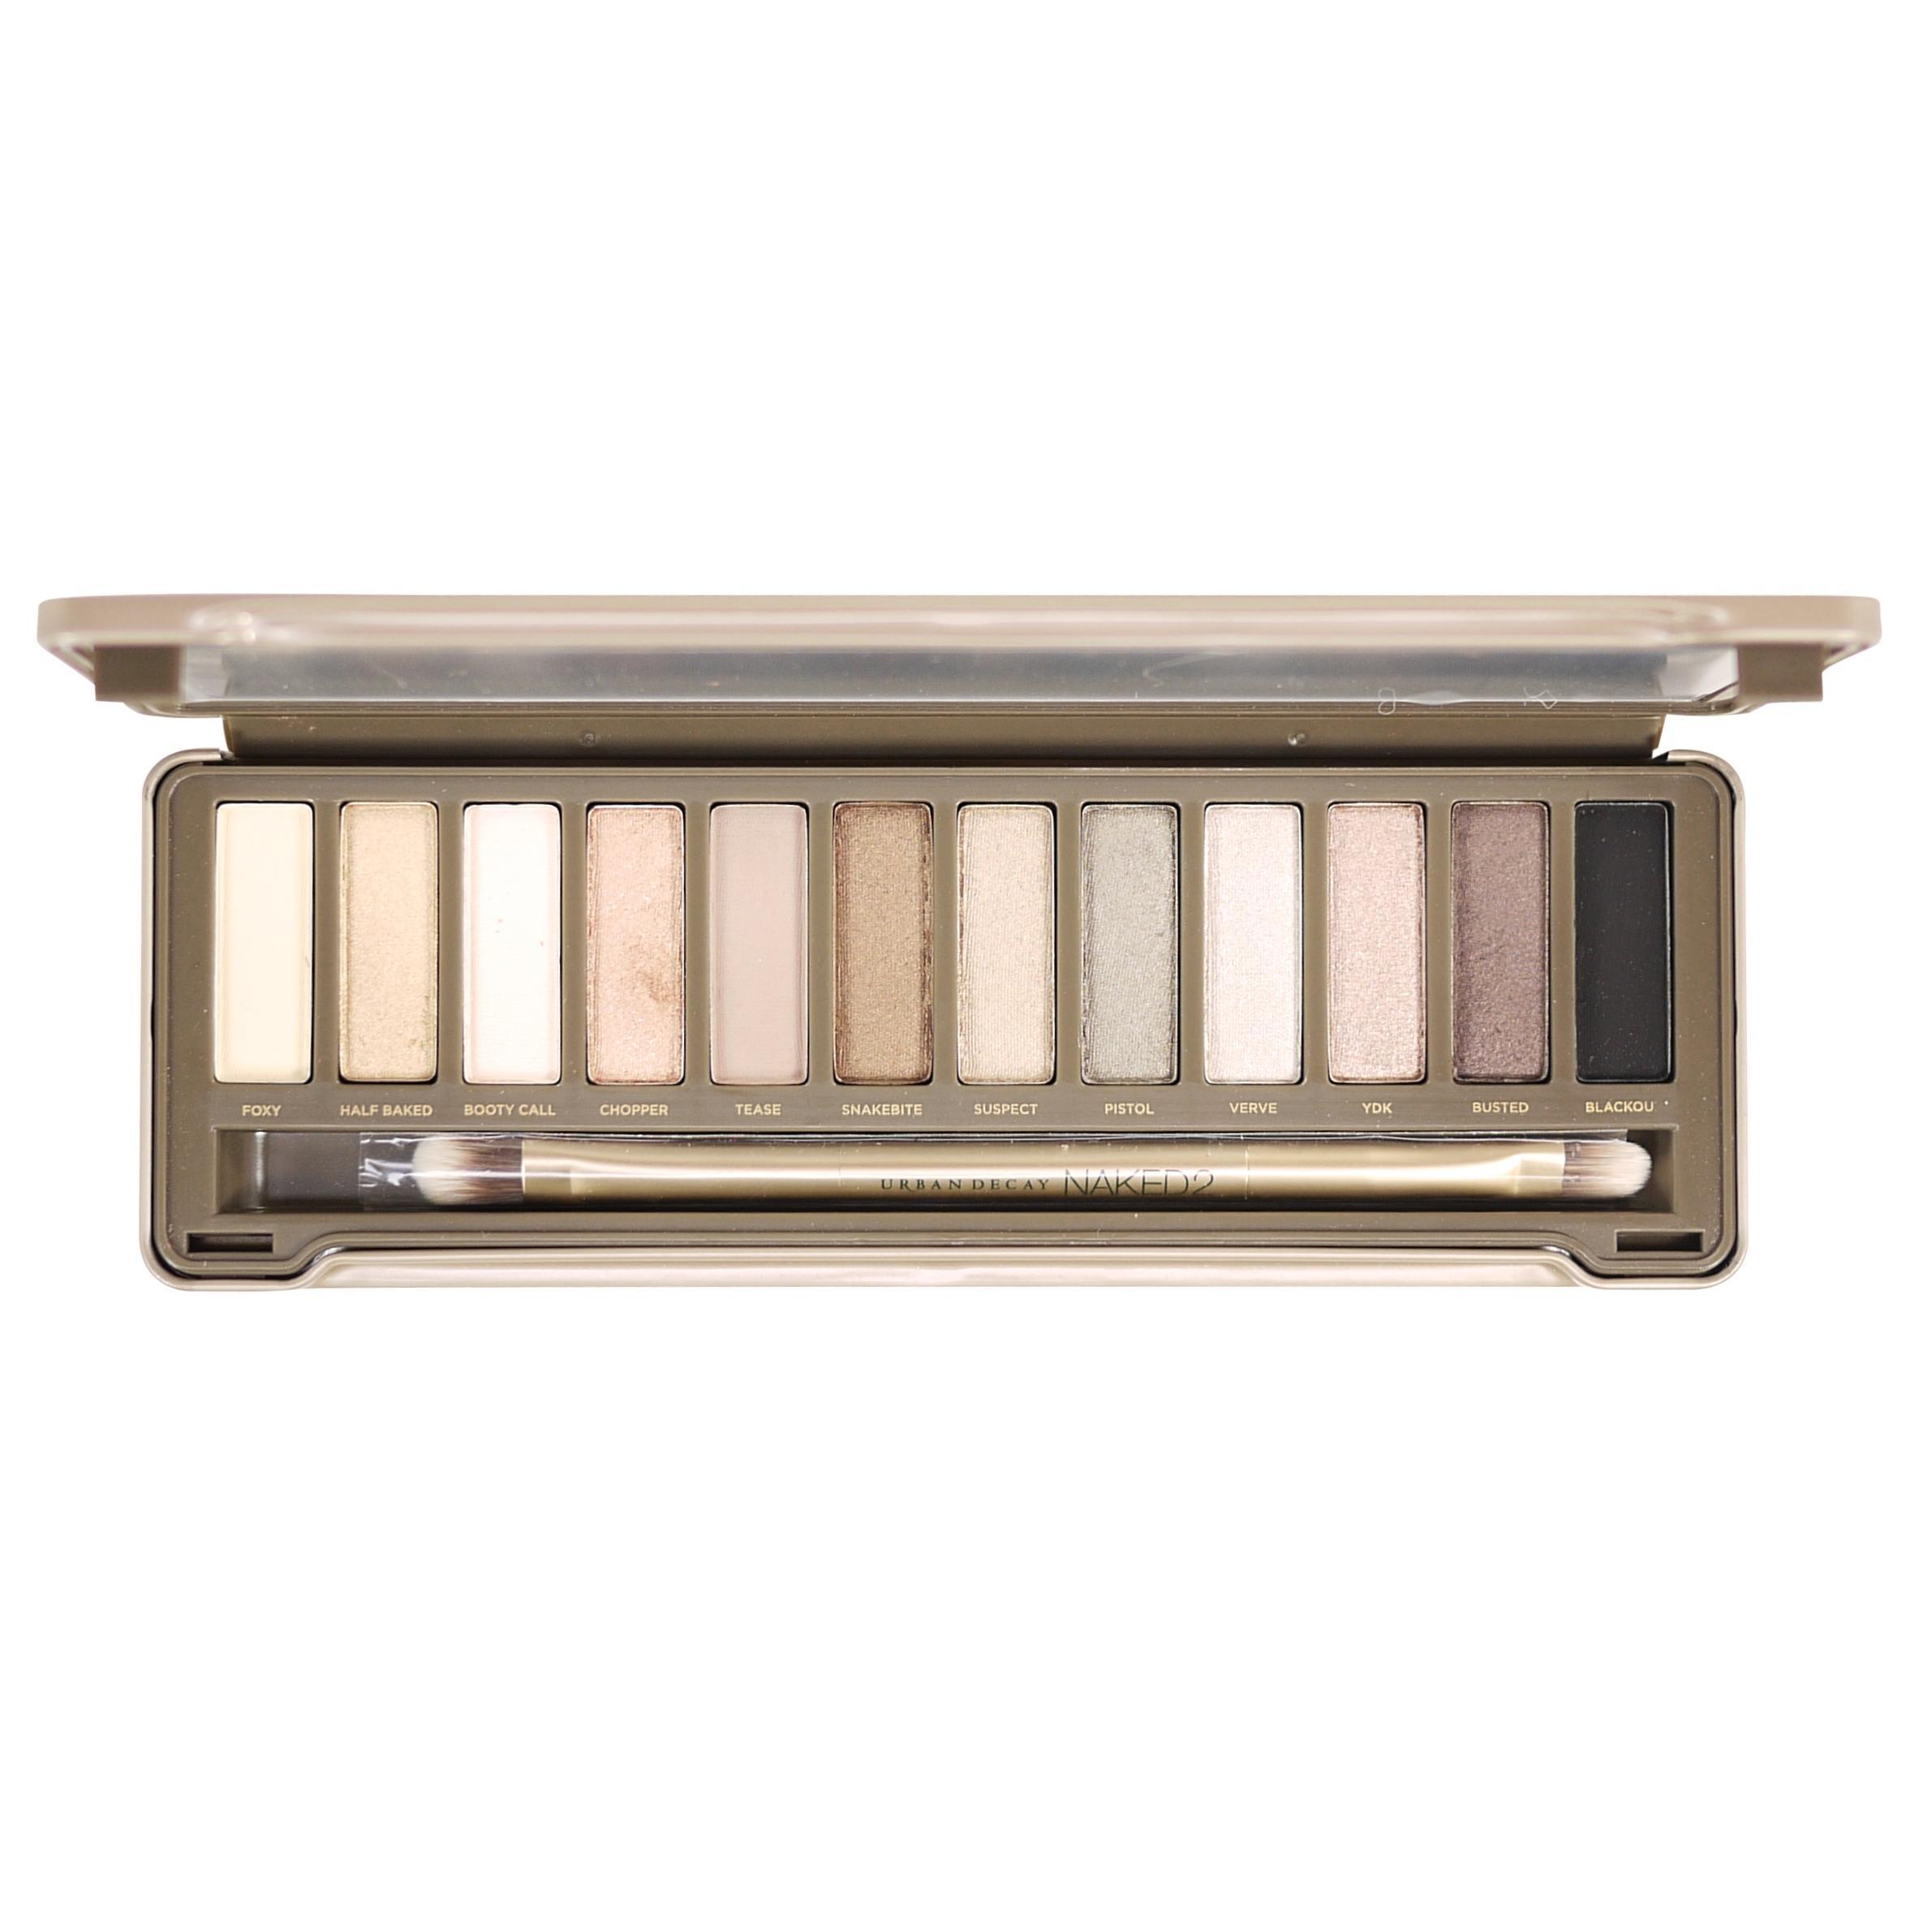 2nd Chance Urban Decay Naked 2 Palette